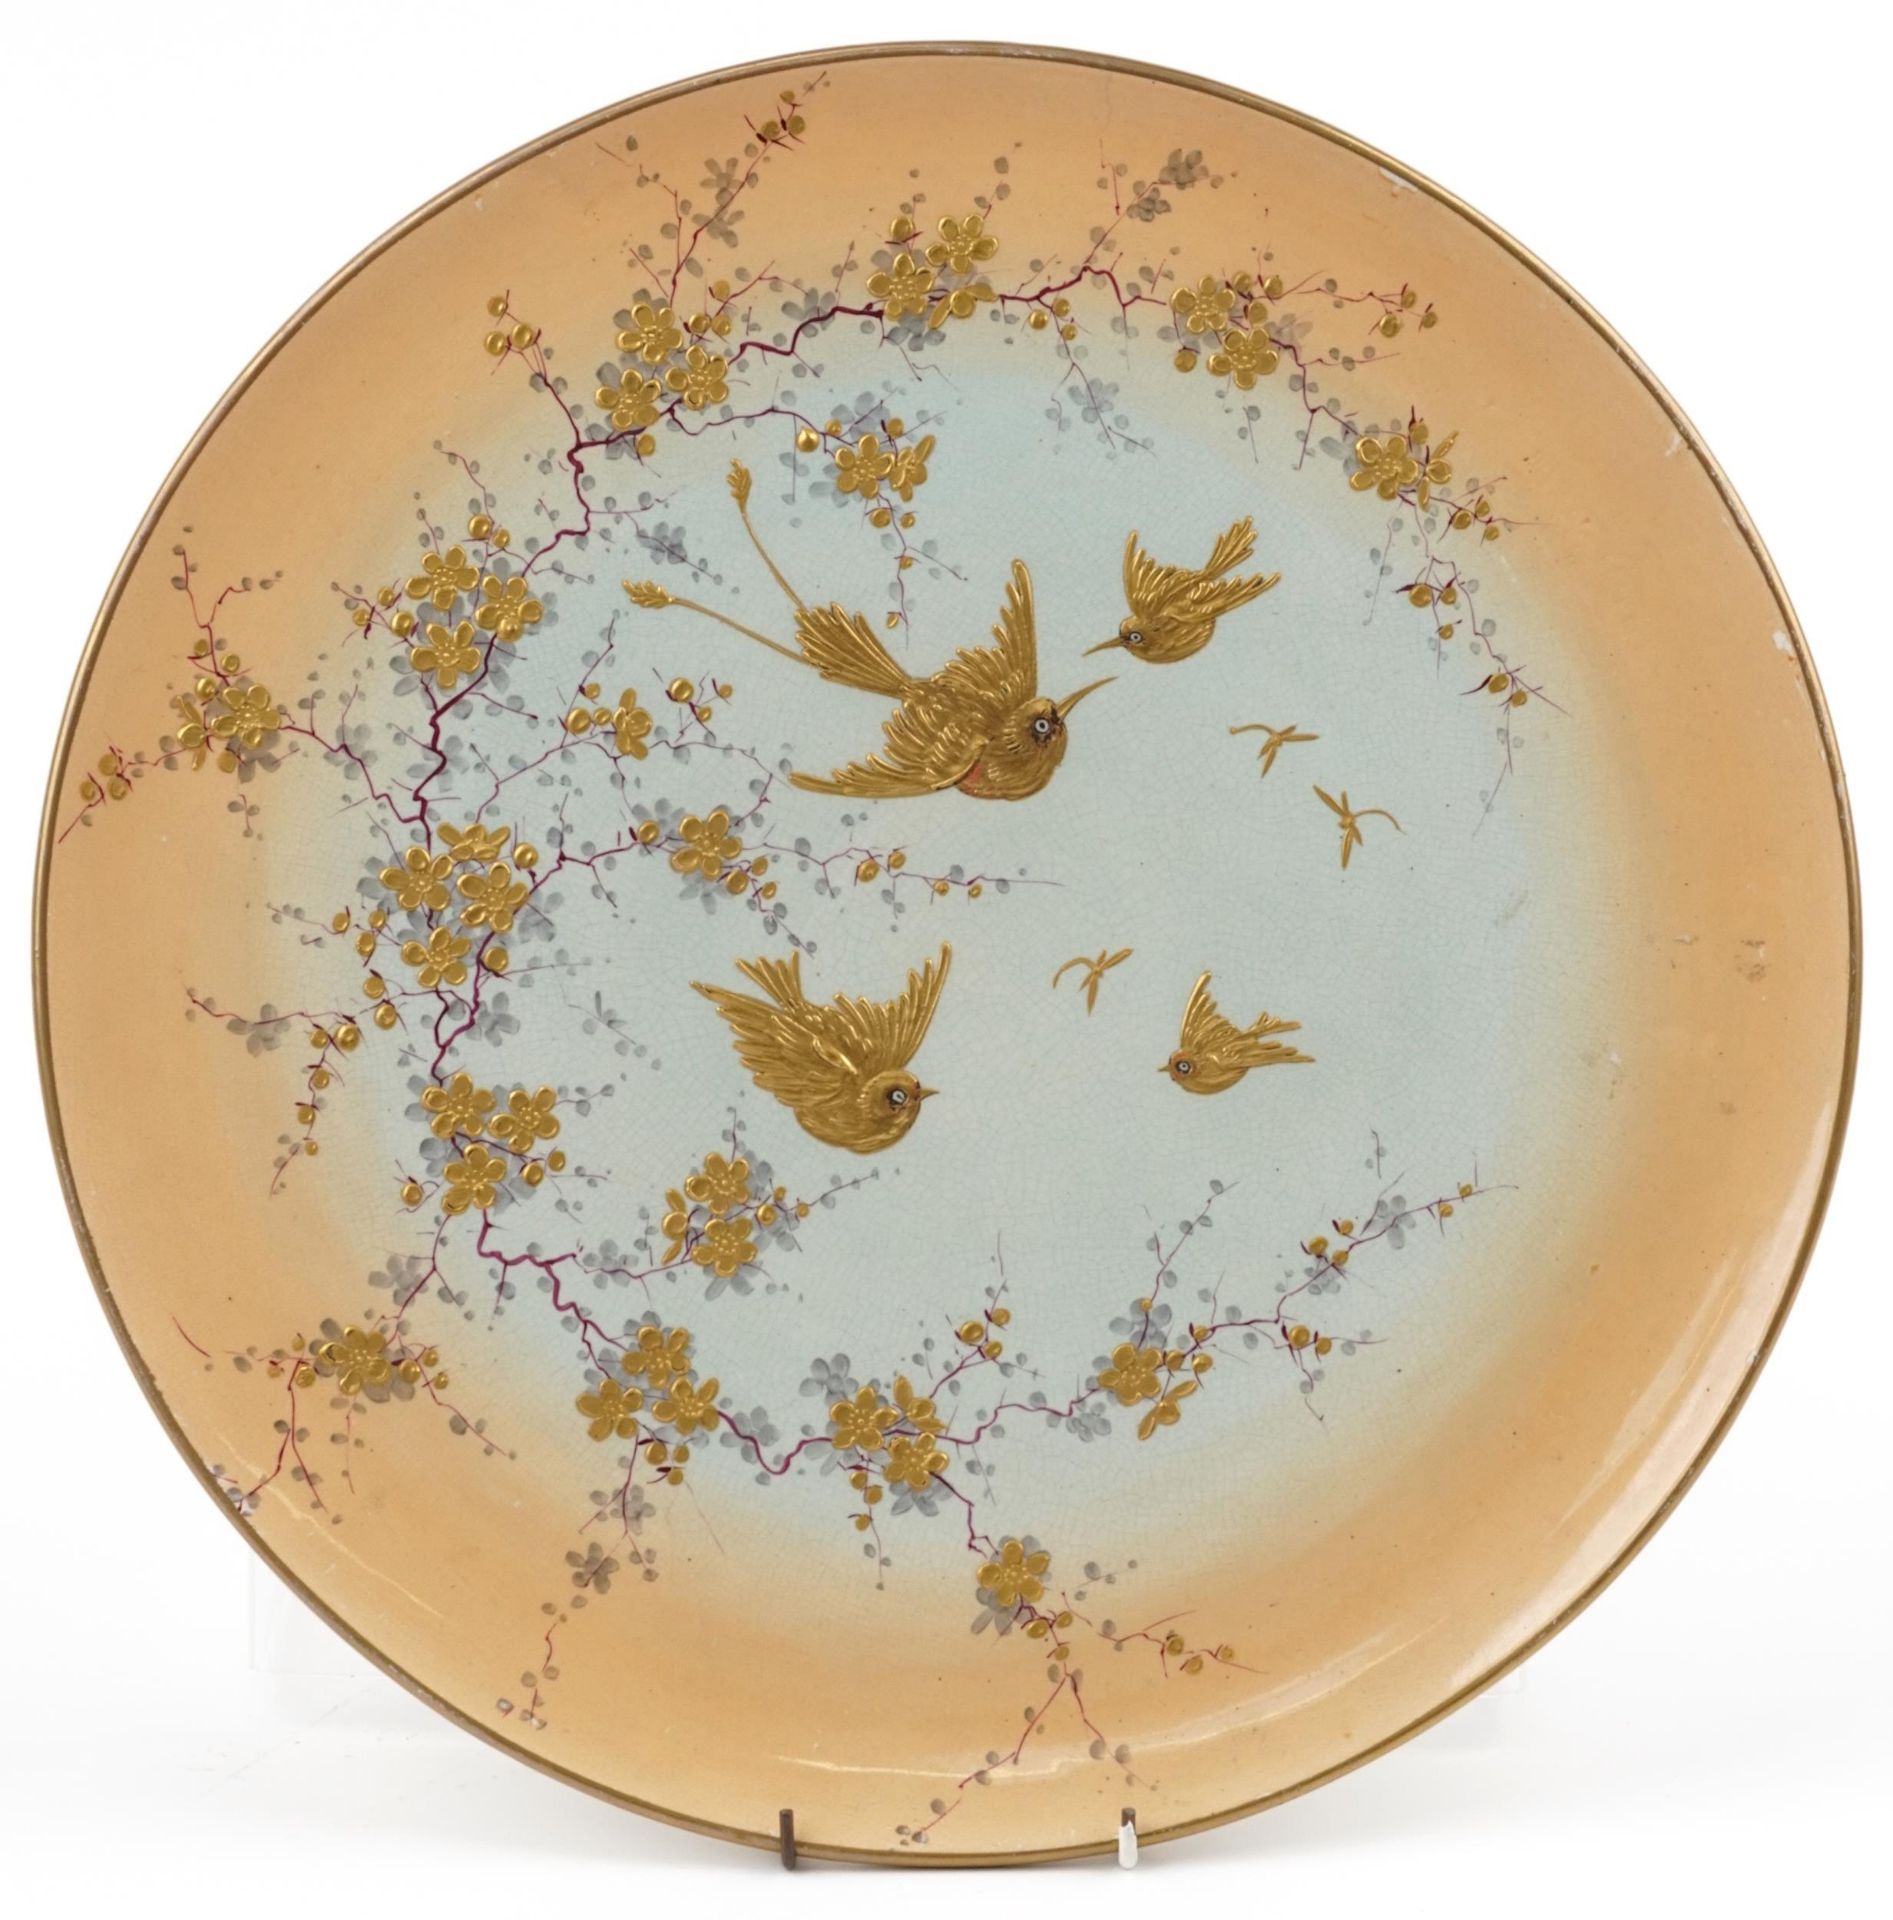 Victorian aesthetic wall charger gilded with birds amongst flowers, 42cm in diameter